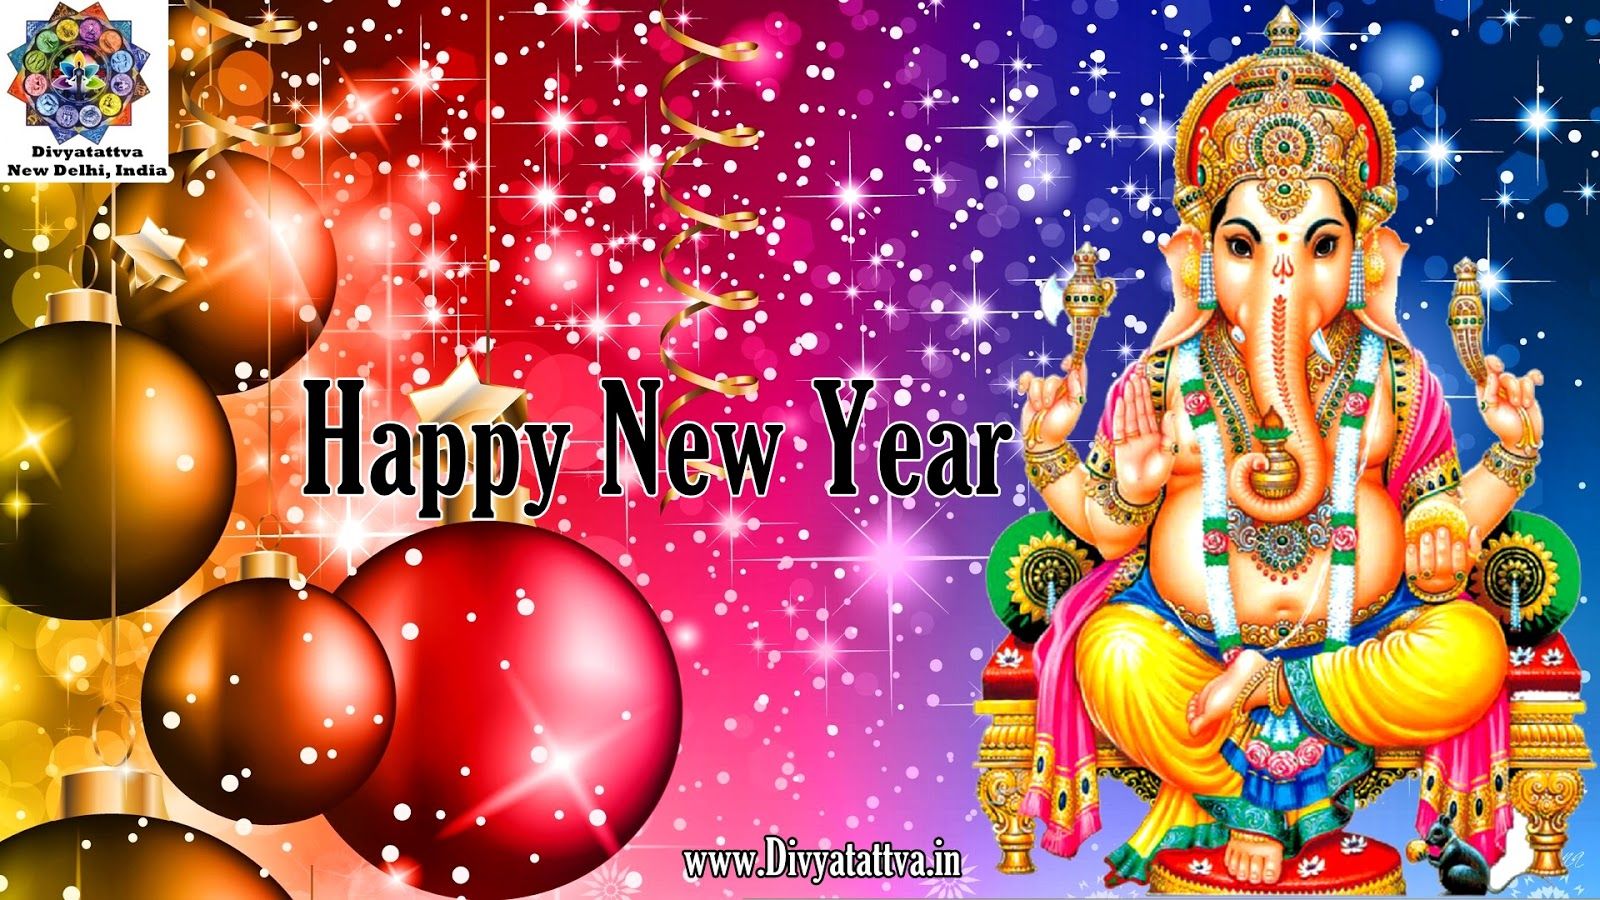 New Year Messages Wallpaper HD Greetings New Year Celebrations Image